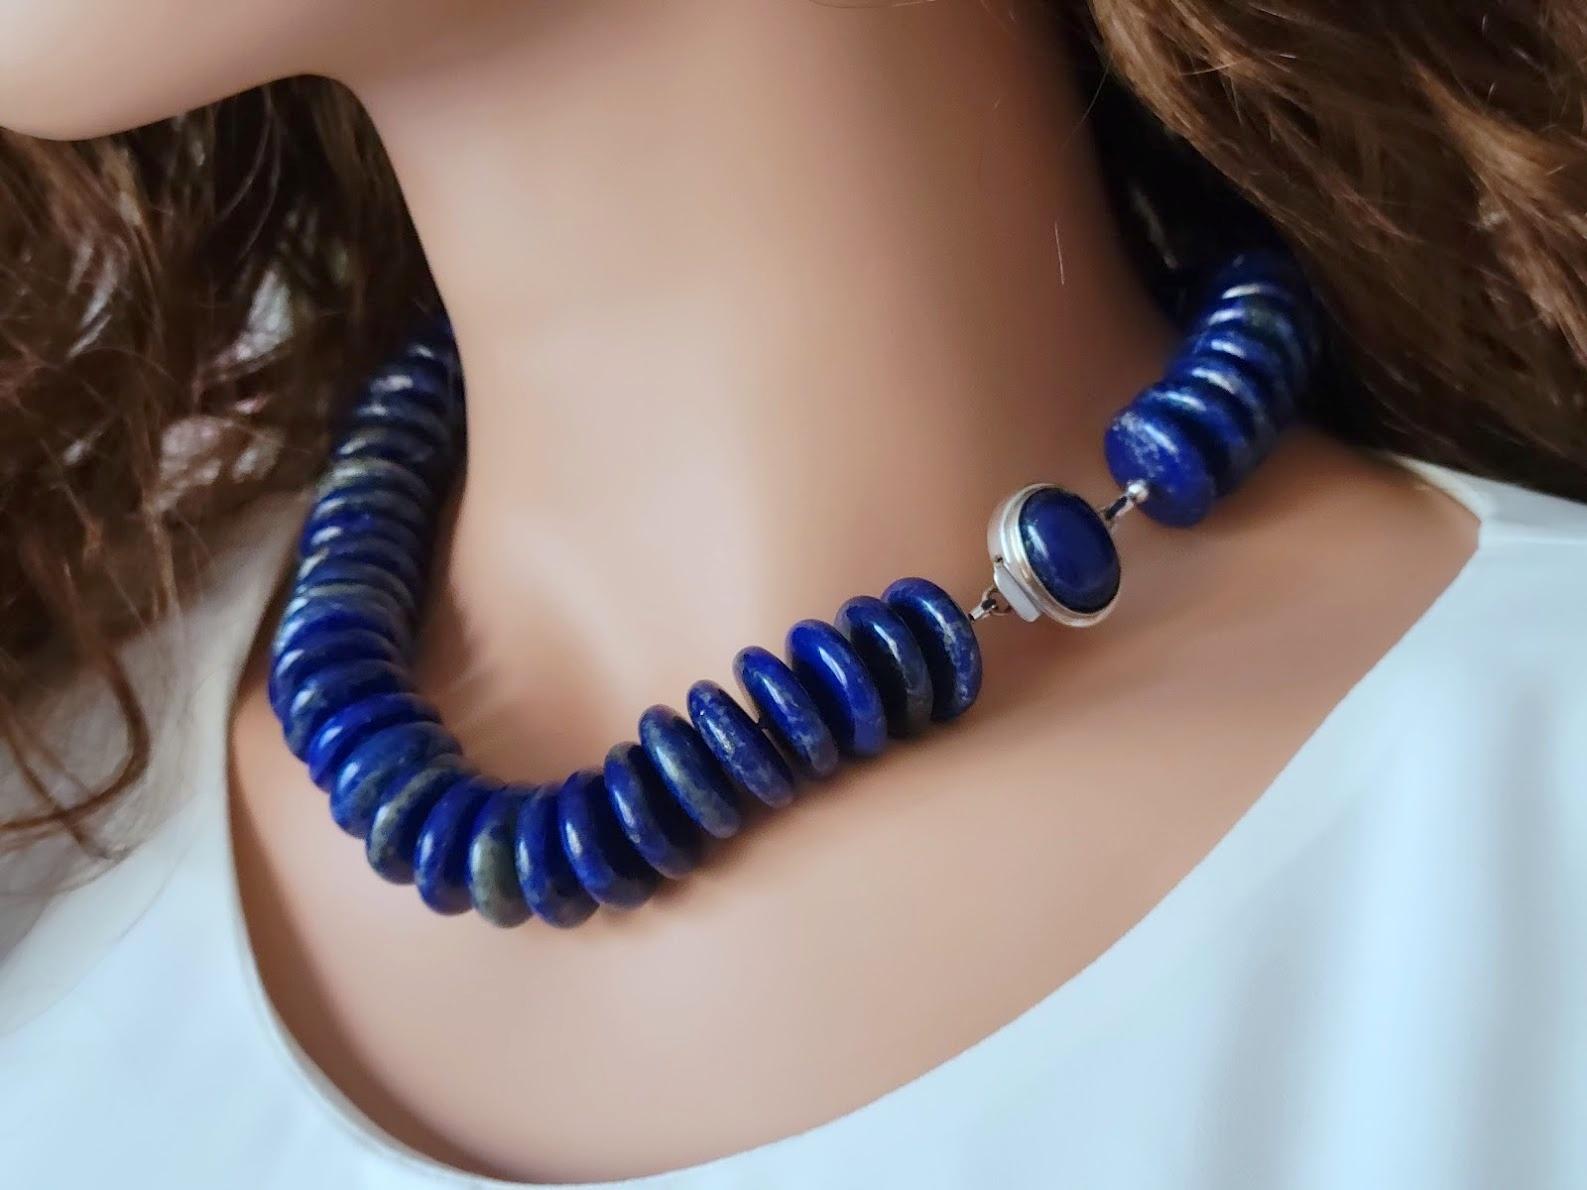 The length of the necklace is 19 inches ( 48 cm). The size of the rondelle beads is 20 mm.
The necklace is made of gems in saturated, deep, dark blue with inclusions of gold pyrite. The beads are very high quality.
Authentic, natural color. No